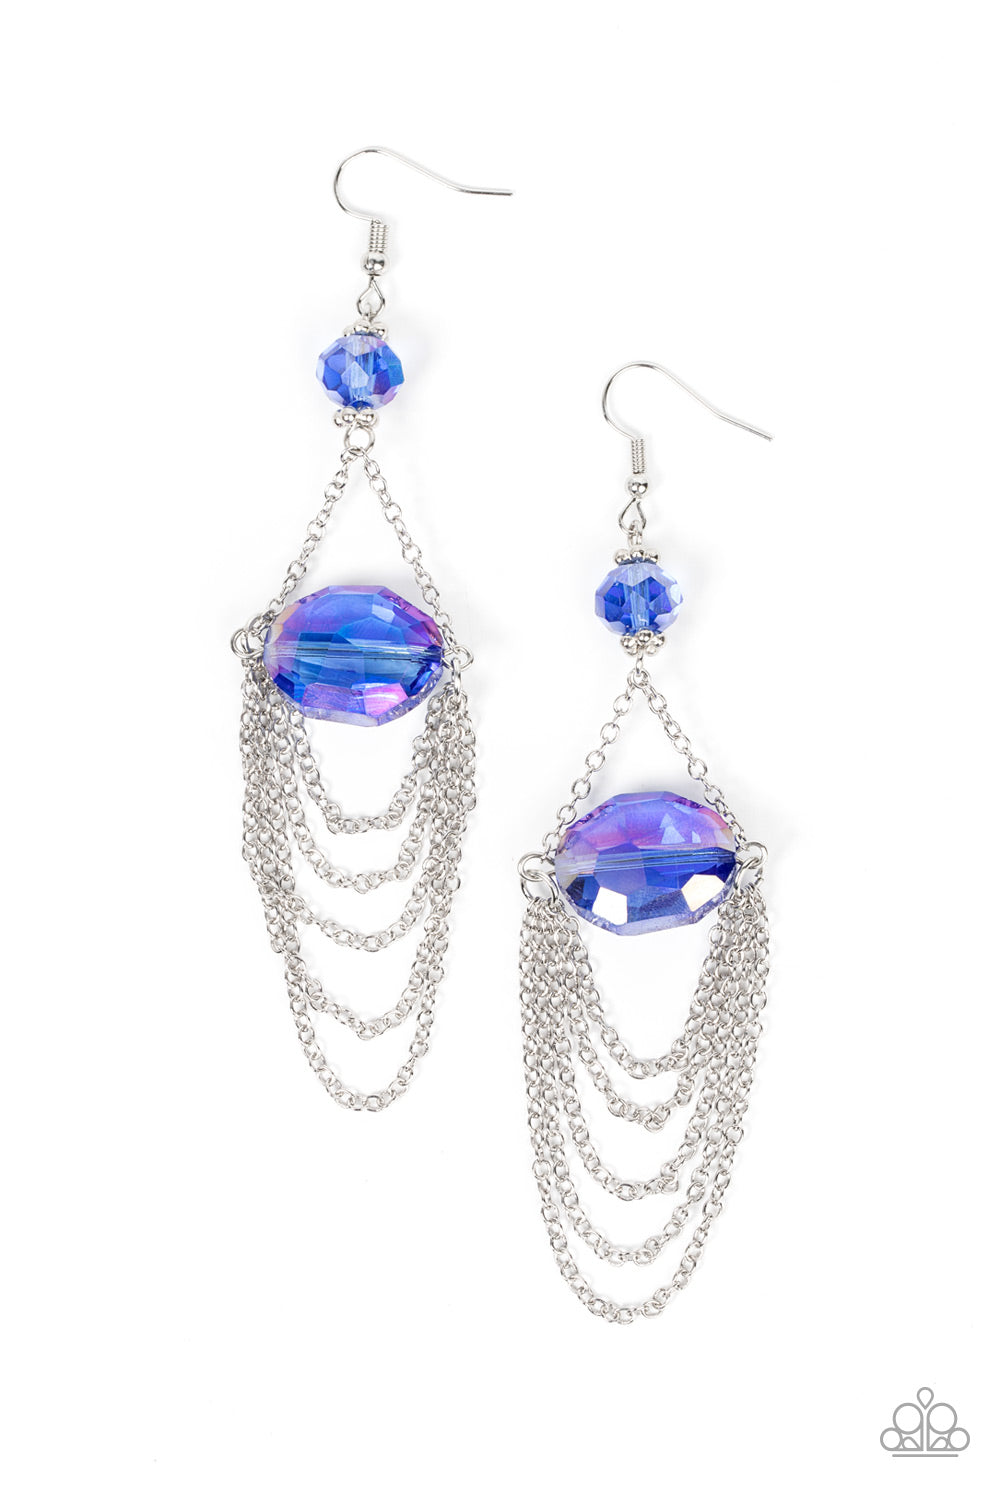 Ethereally Extravagant ♥ Blue Iridescent Earrings ♥ Paparazzi Accessories - GlaMarous Titi Jewels